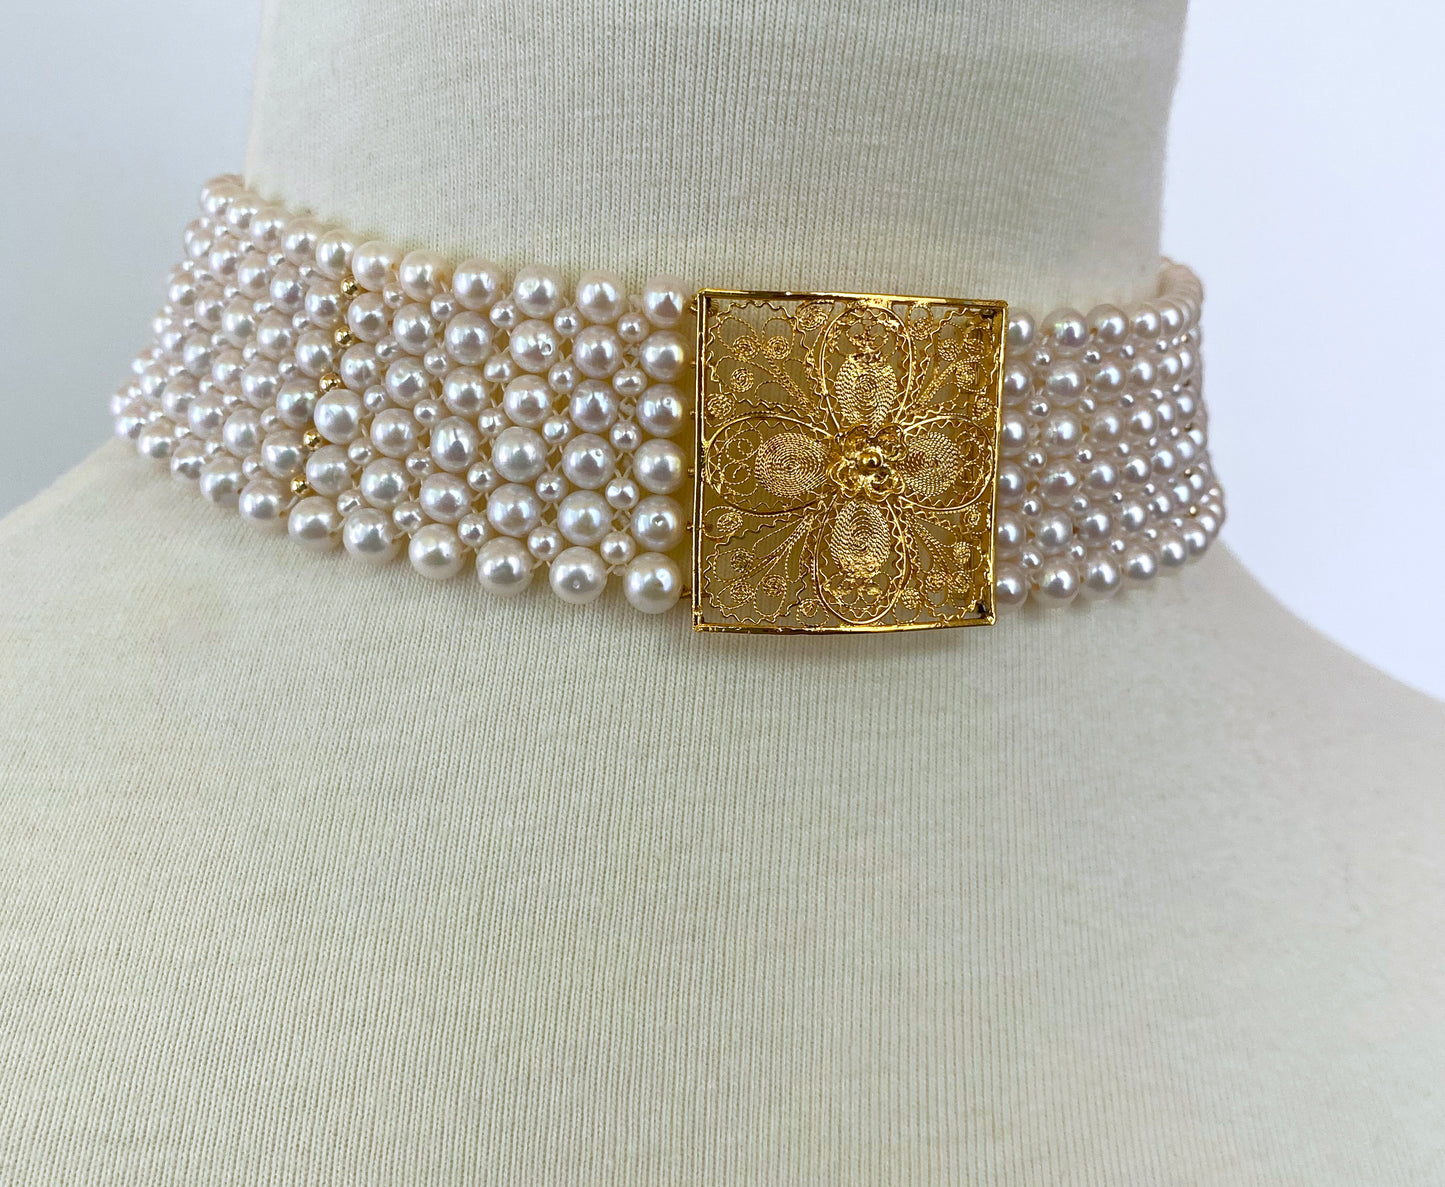 Pearl Woven Choker with 18k Yellow Gold Floral Centerpiece and Findings